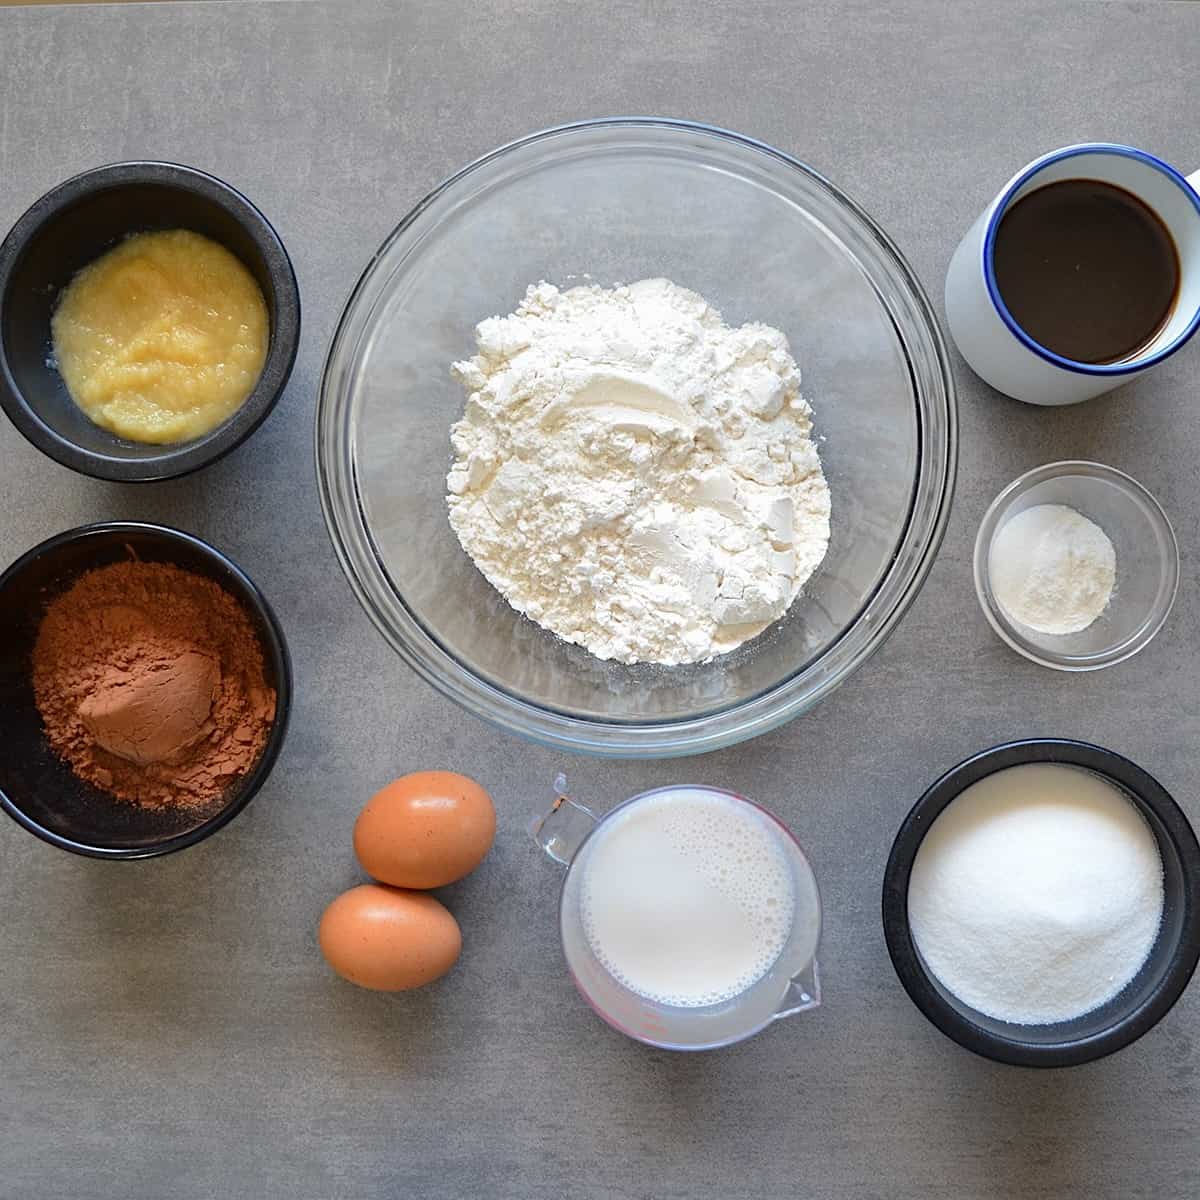 Measured ingredients for homemade cake